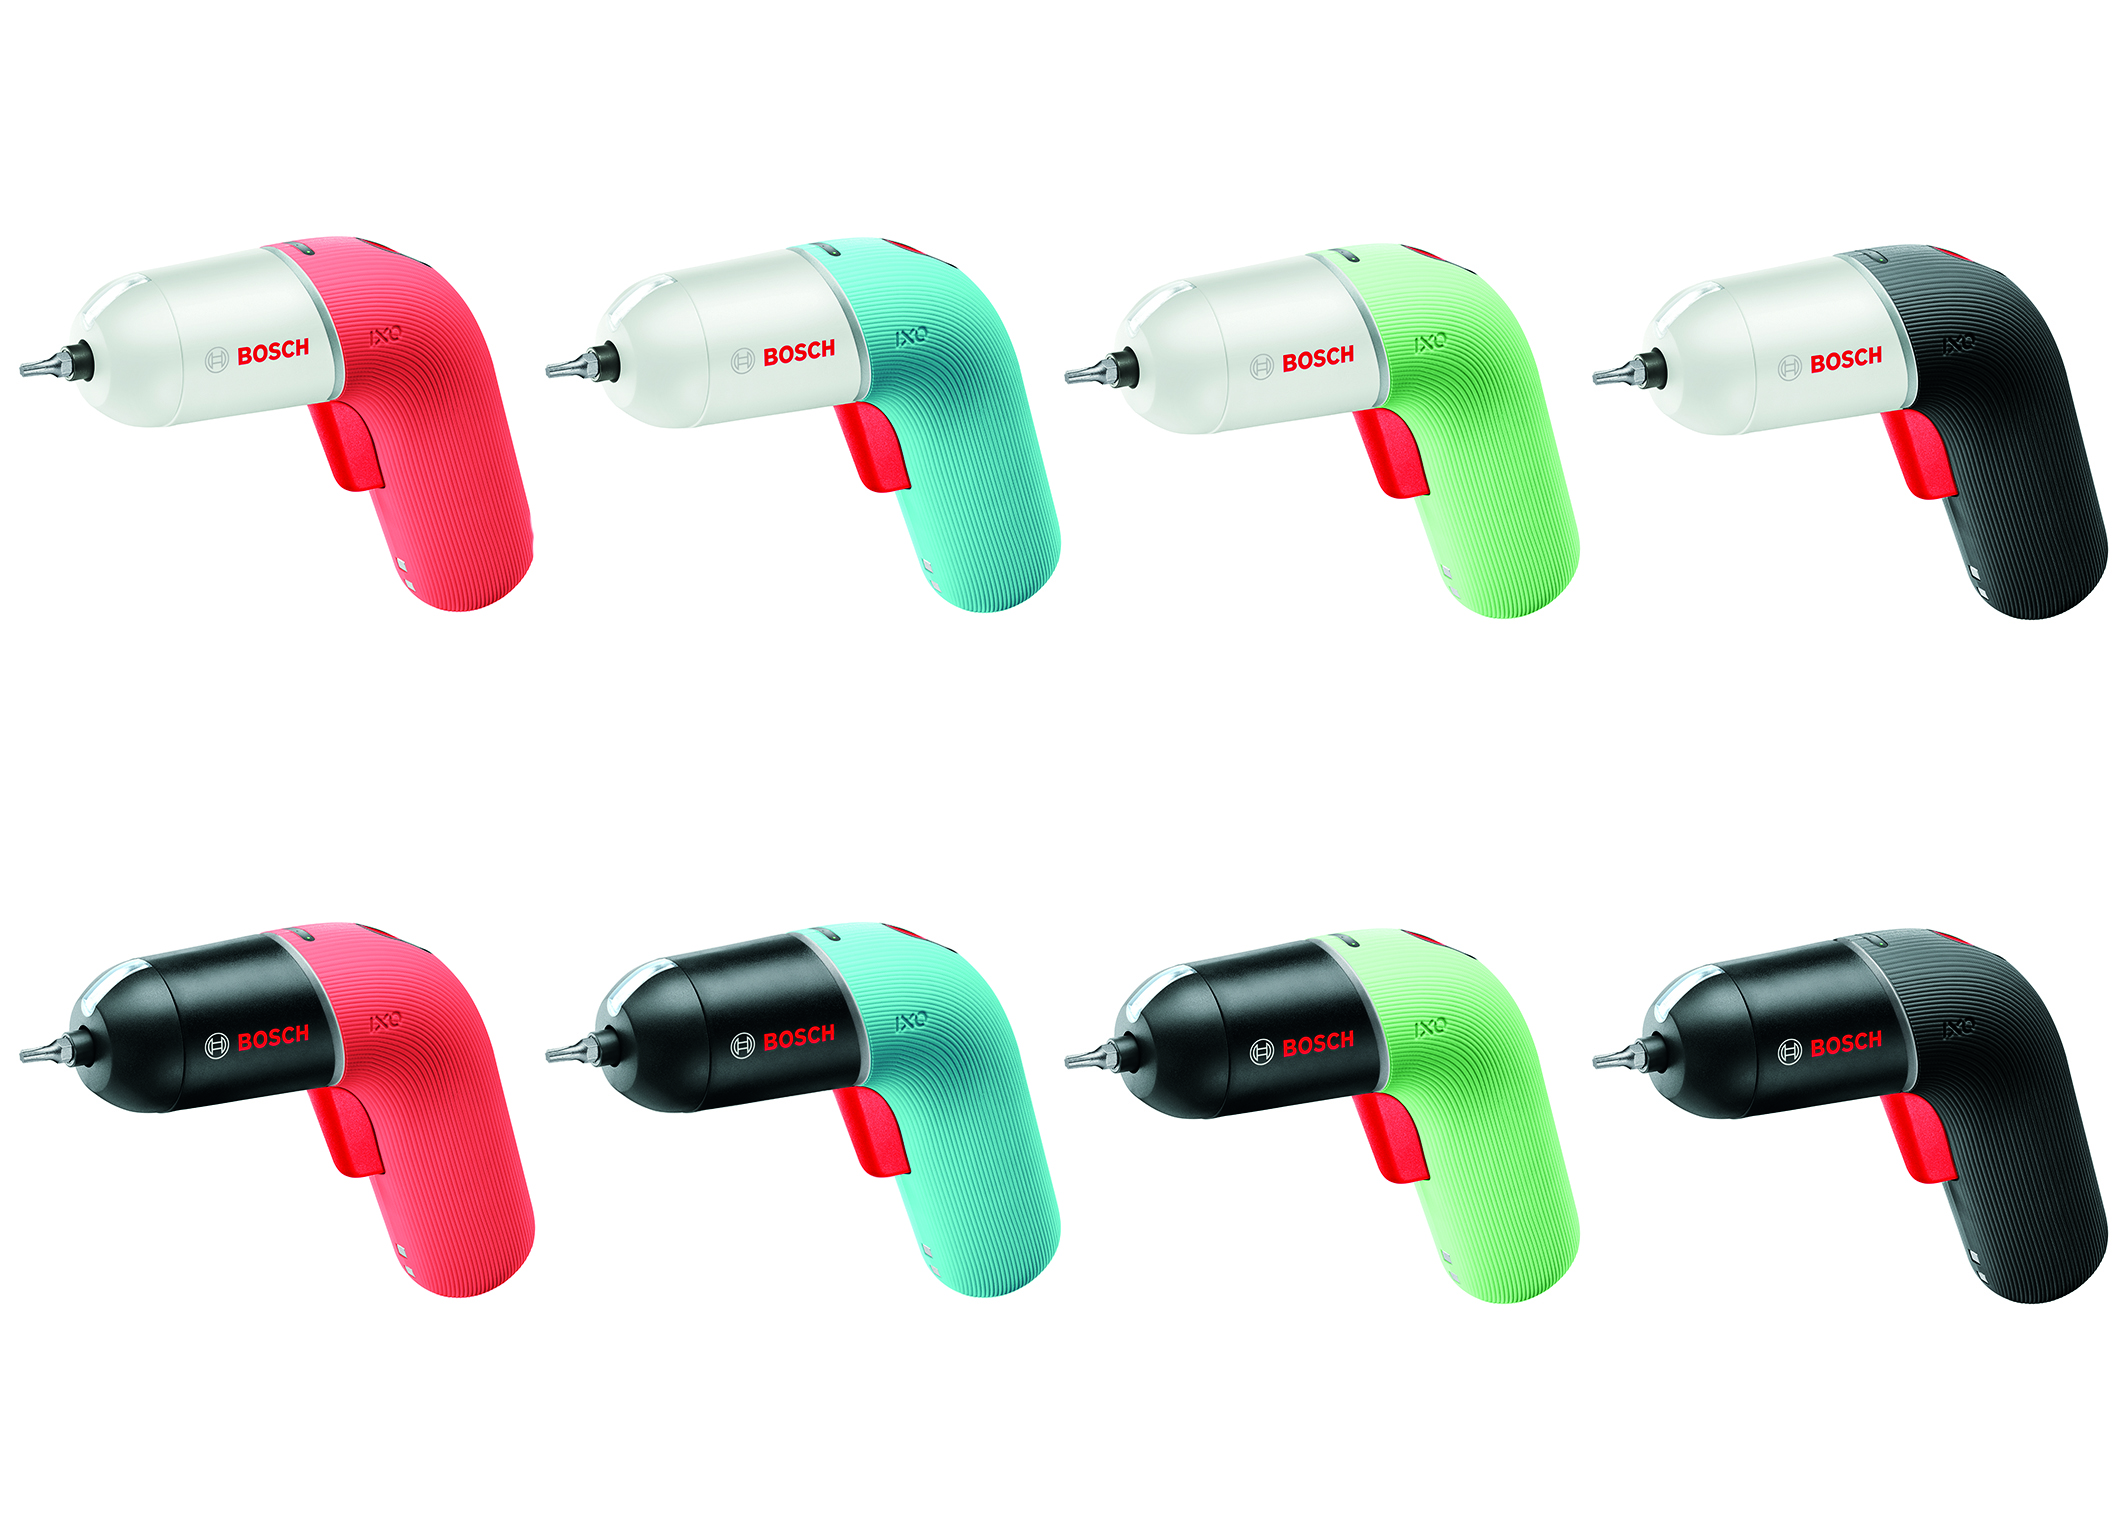 Individual Look for the cult screwdriver: Style your Bosch Ixo now as you  wish - Bosch Media Service